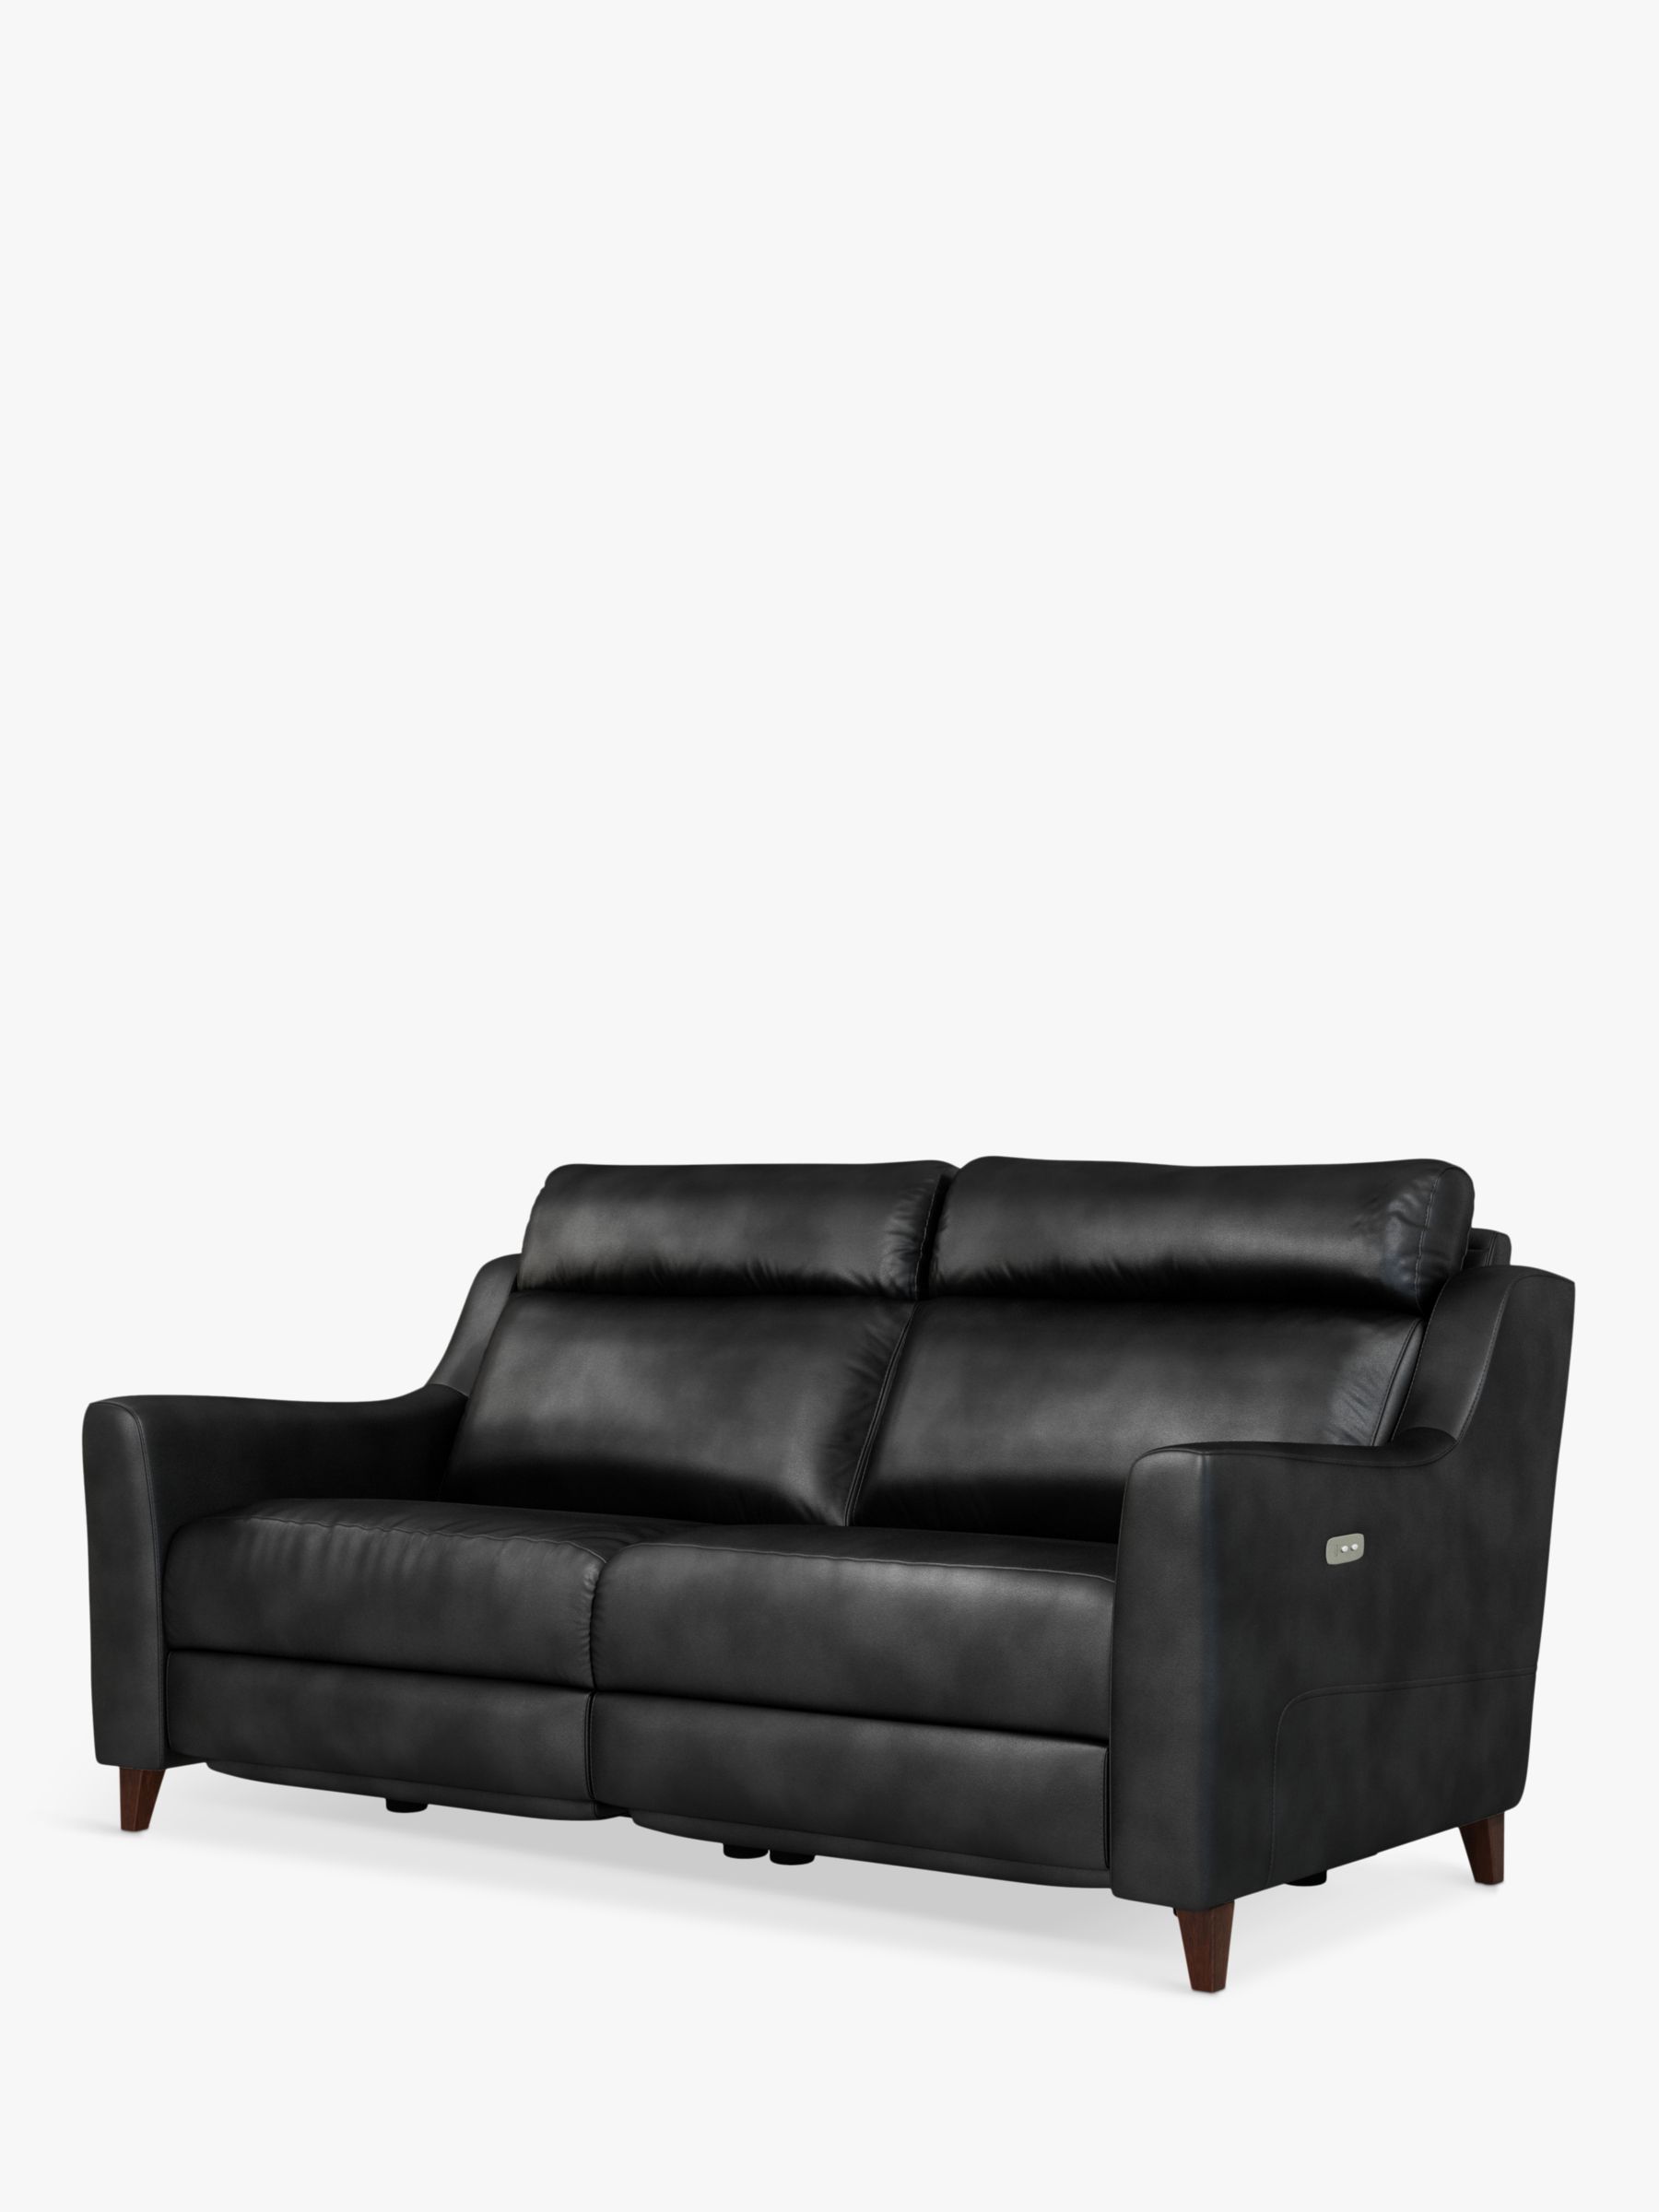 2 Seater Power Recliner Leather Sofa, Leather Sofa Electric Recliner